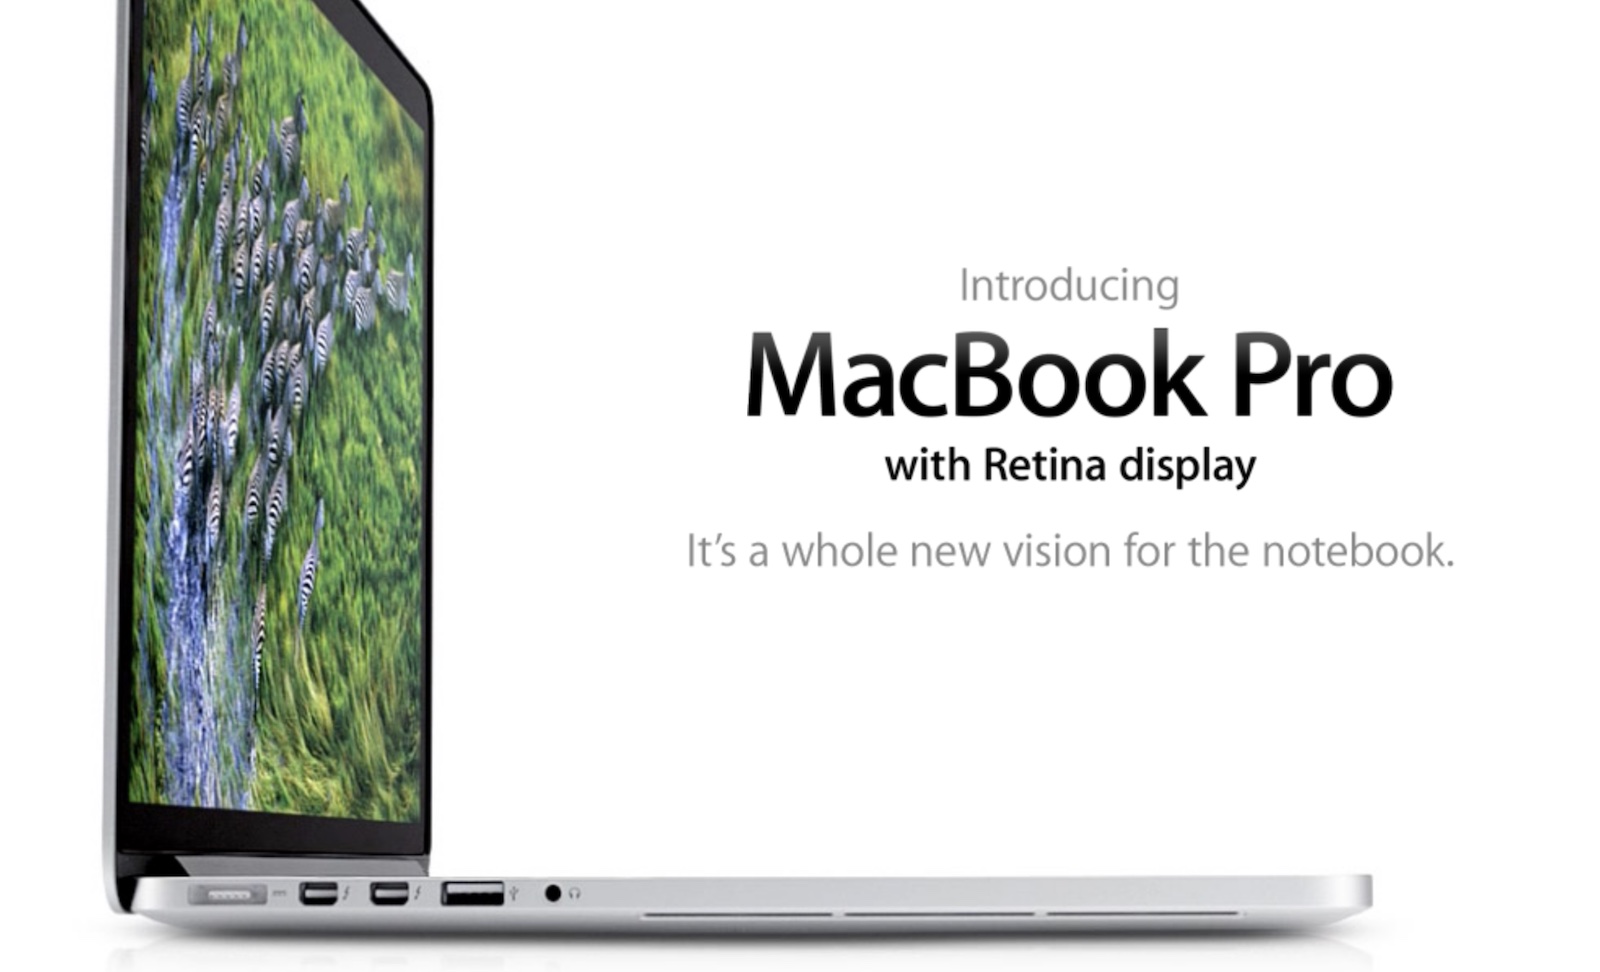 10 Years Ago Today: Apple Announces First MacBook Pro With a Retina Display